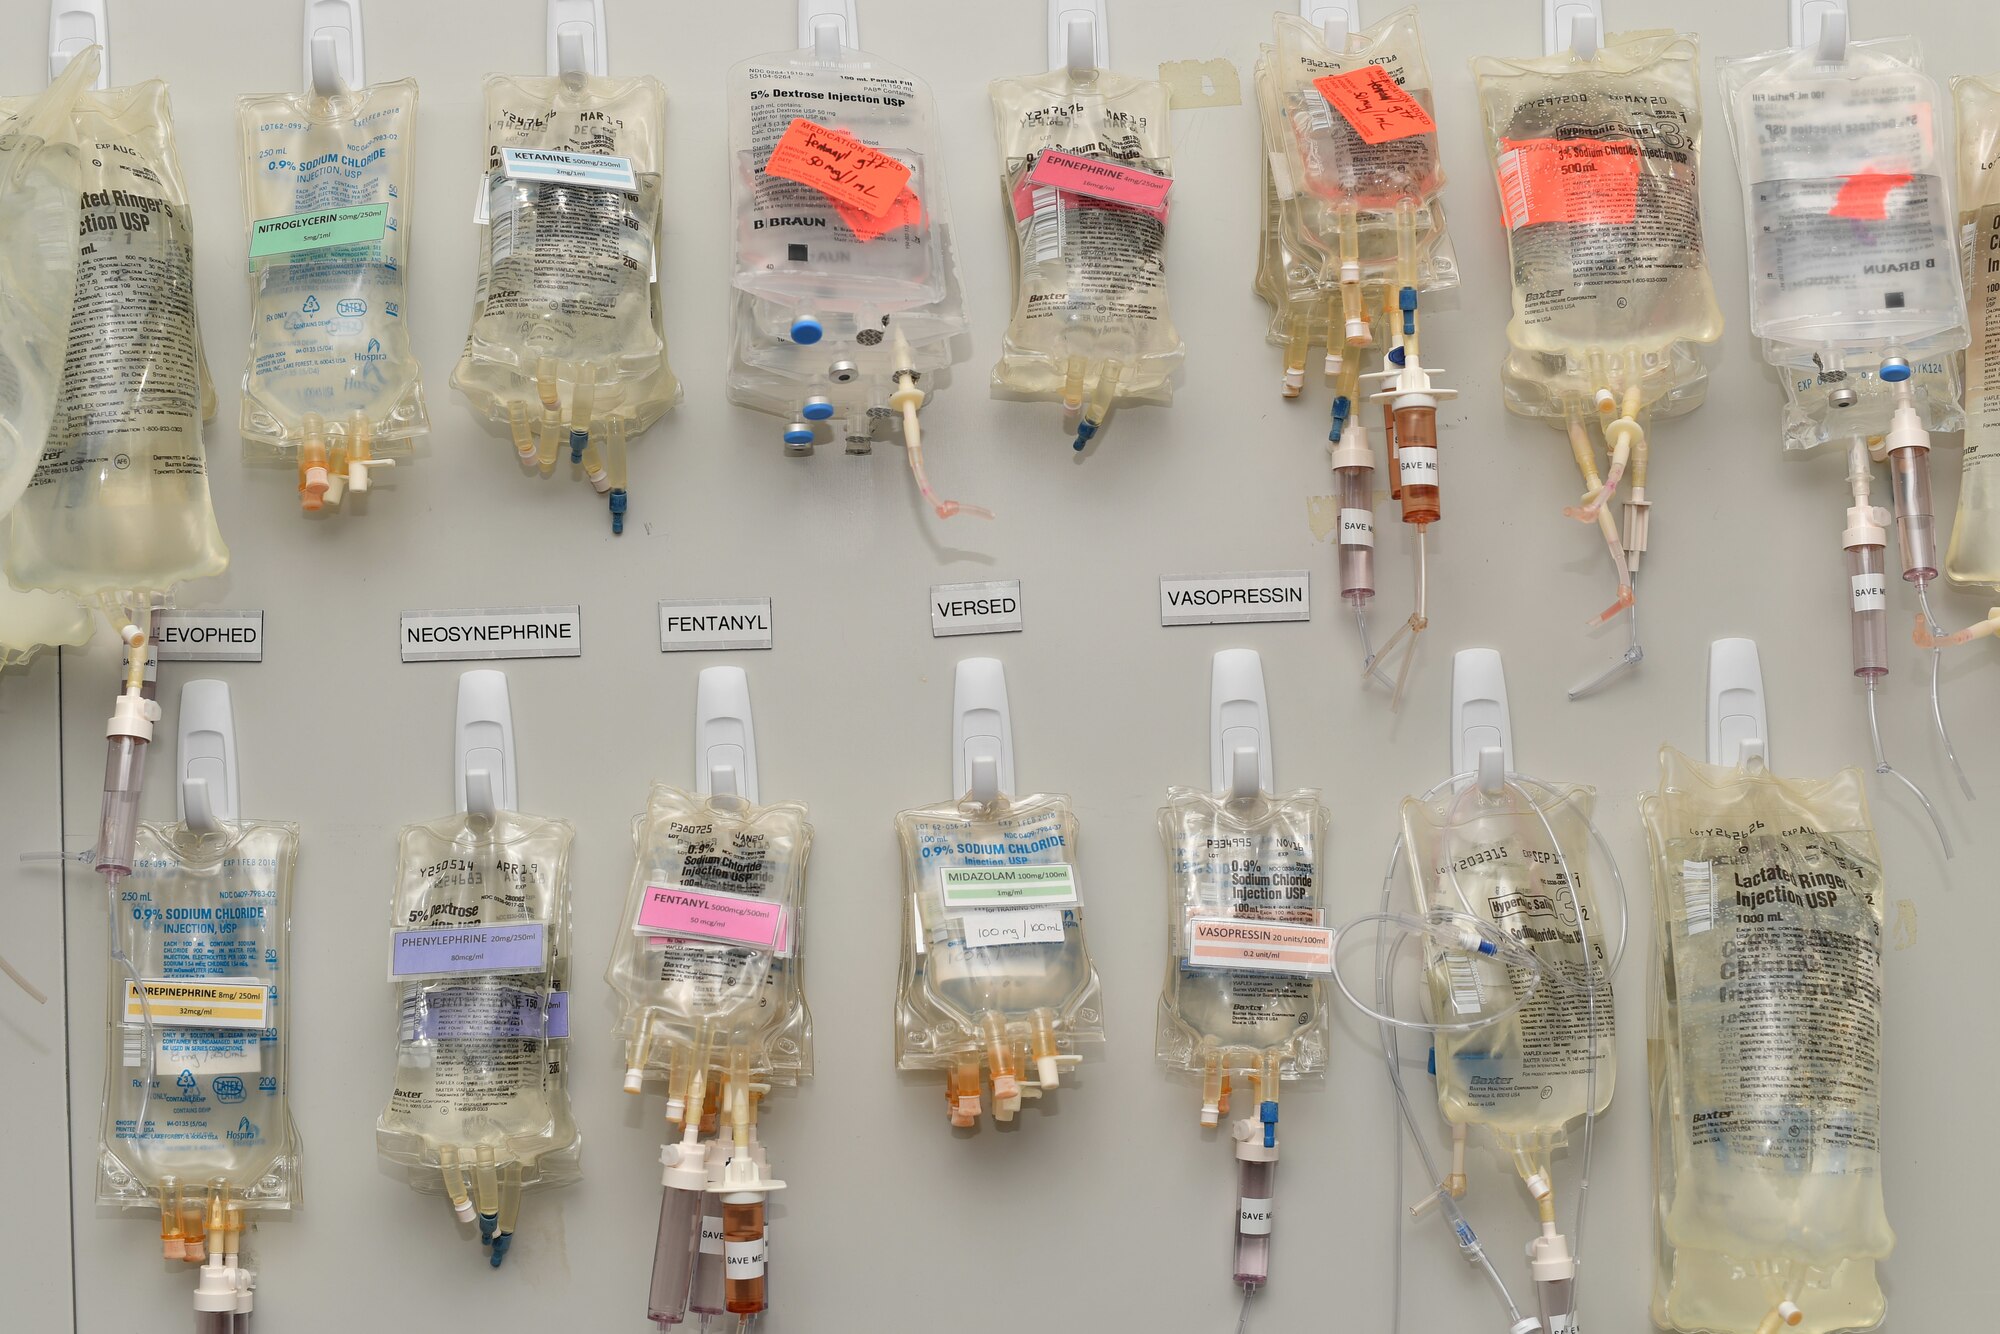 Medications in IV drip bags hang on a wall.